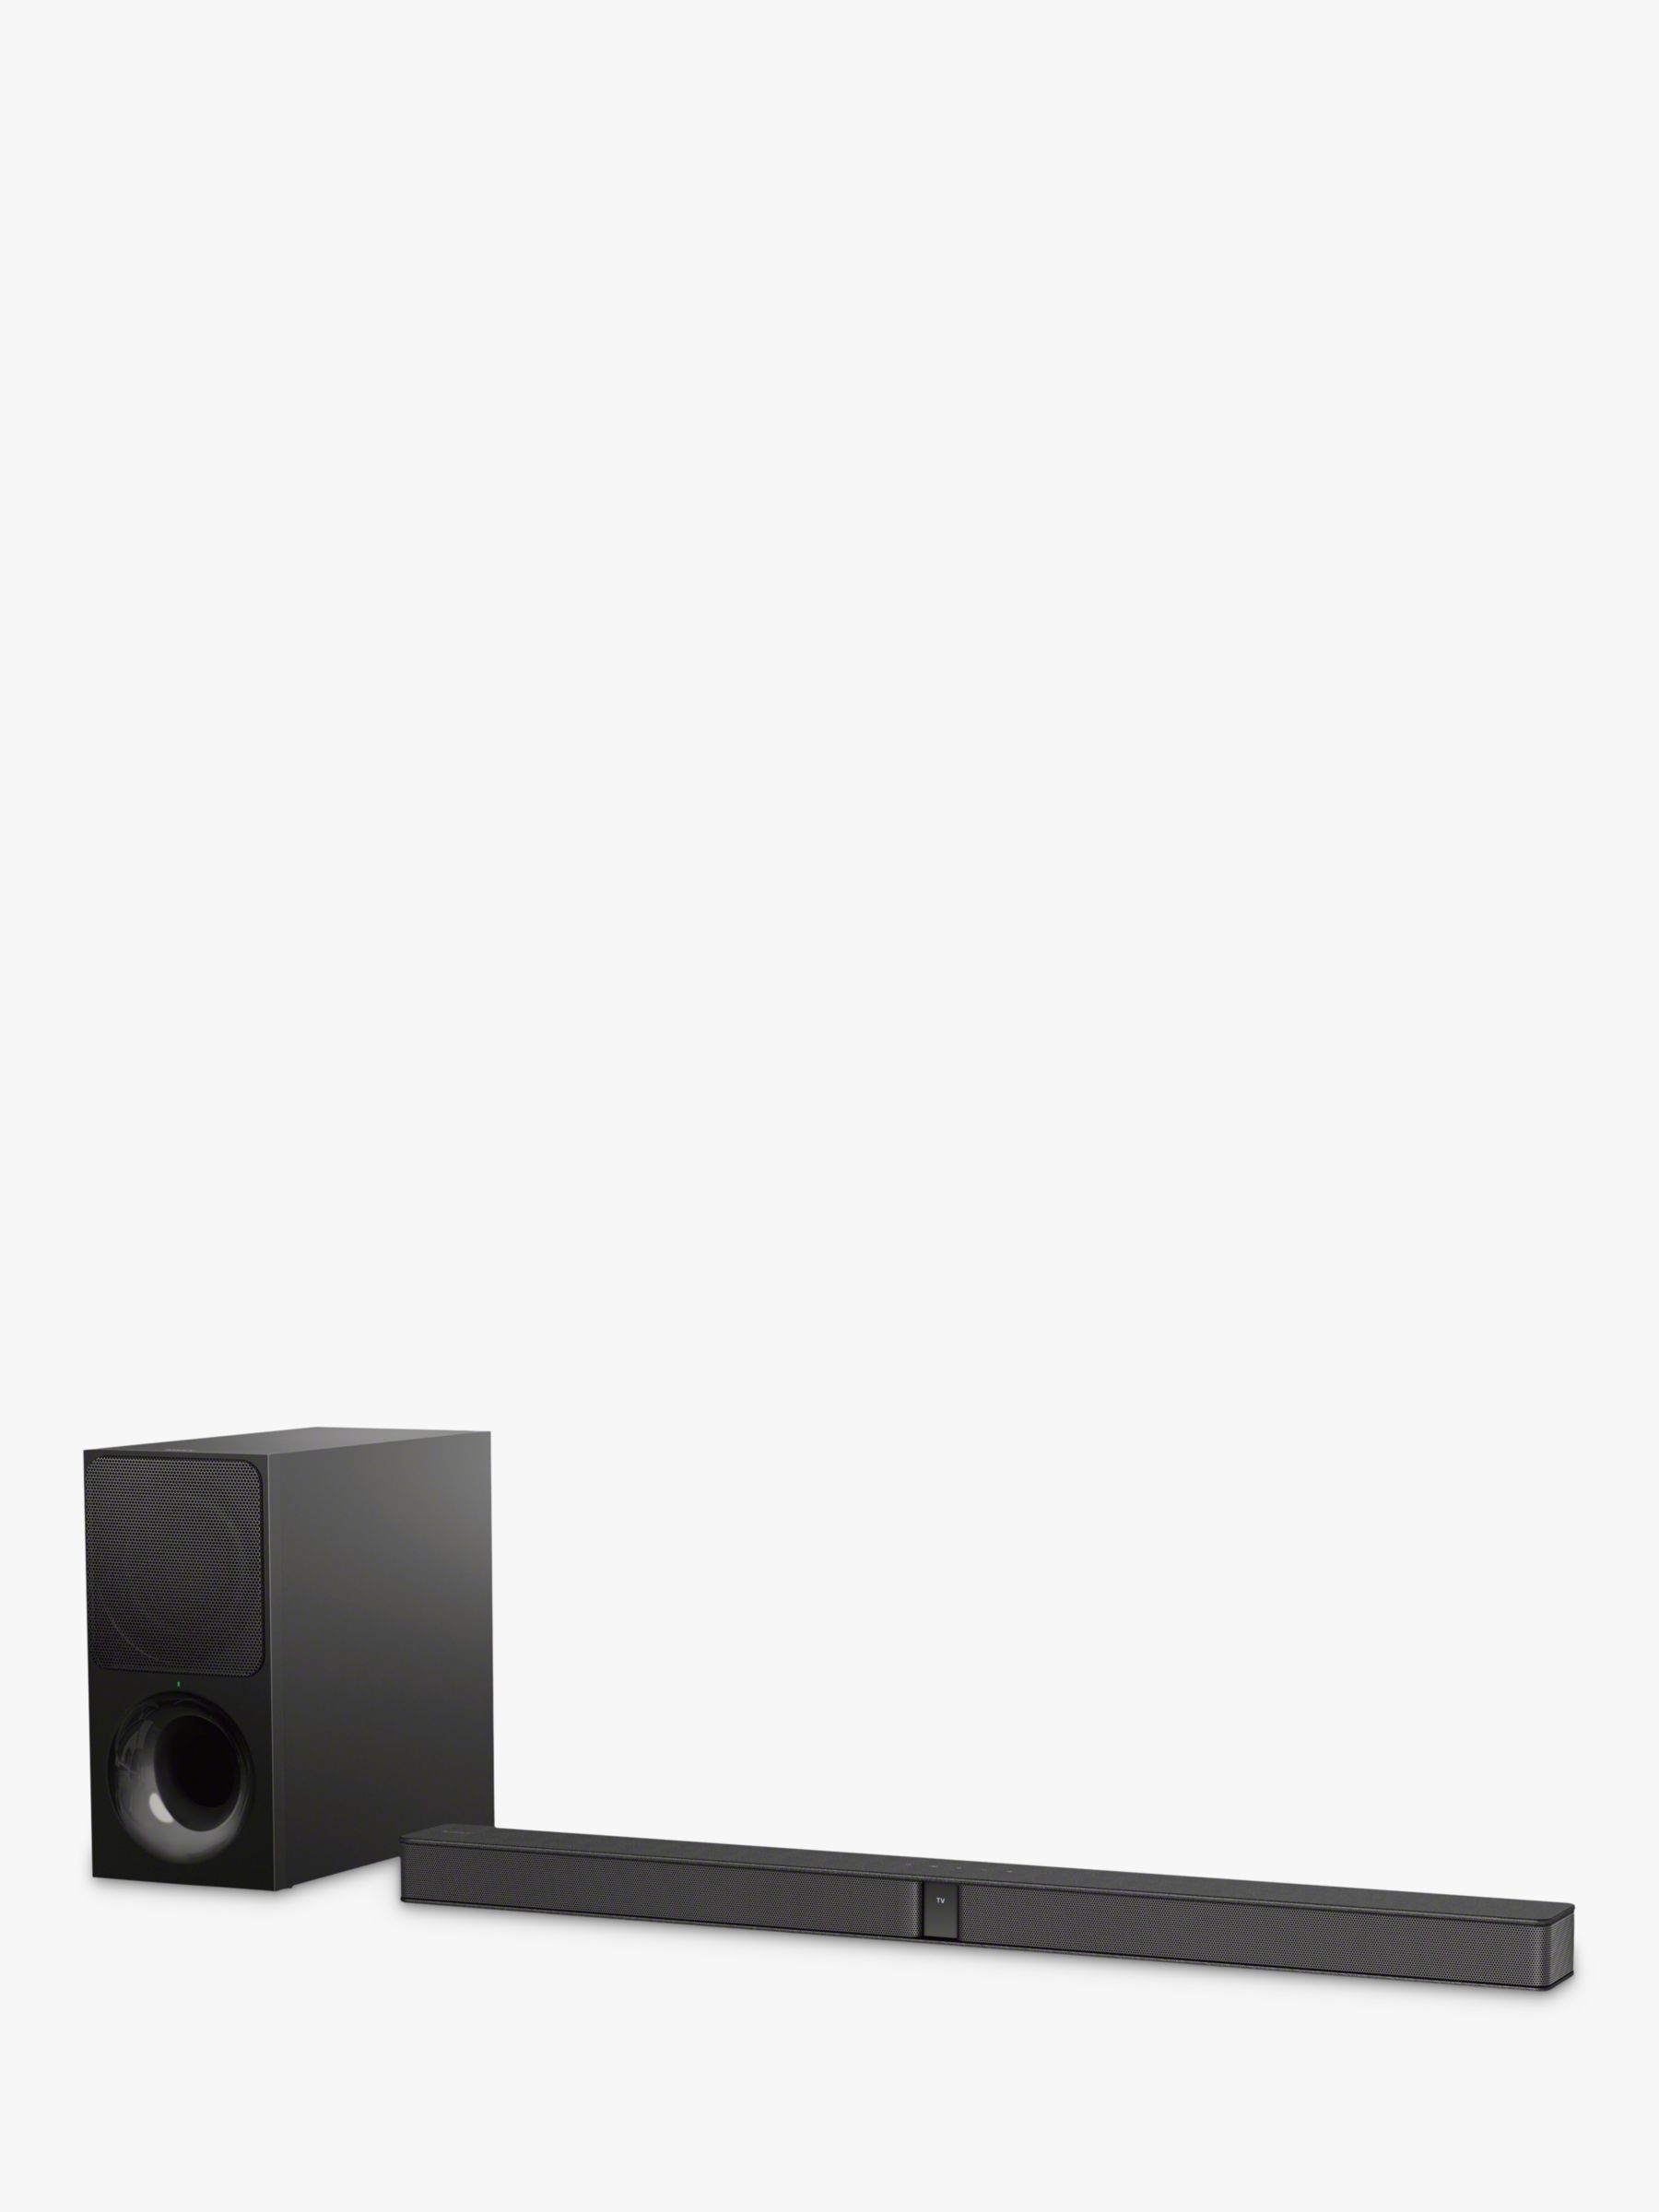 Sony HT-CT290 Bluetooth Sound Bar with Wireless Subwoofer, Black